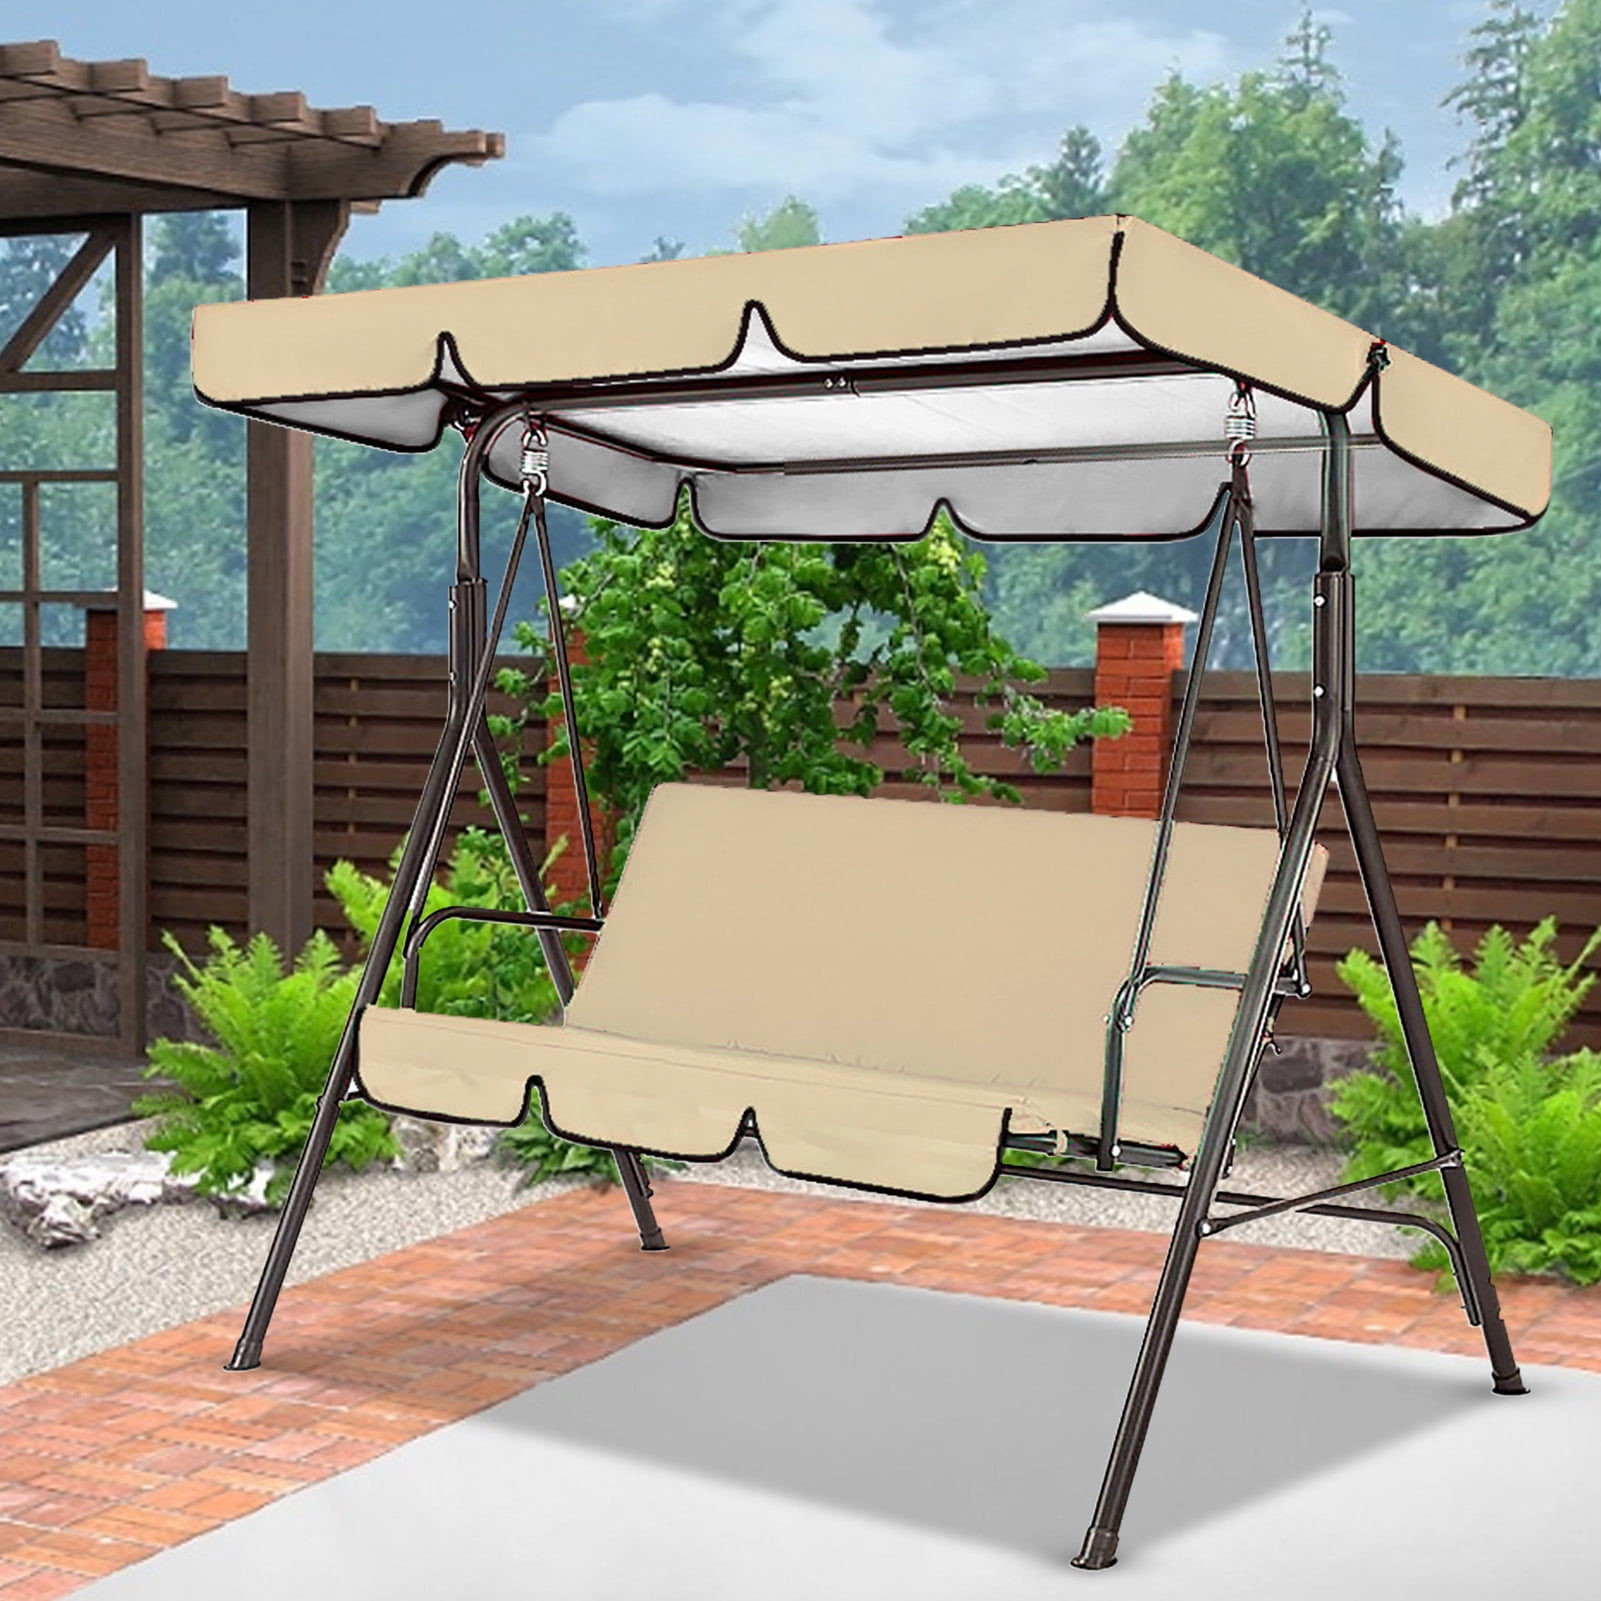 Details about   Shatex 90% Sun Shade Panel for Outdoor Garden Canopy 12x20ft Wheat Color 